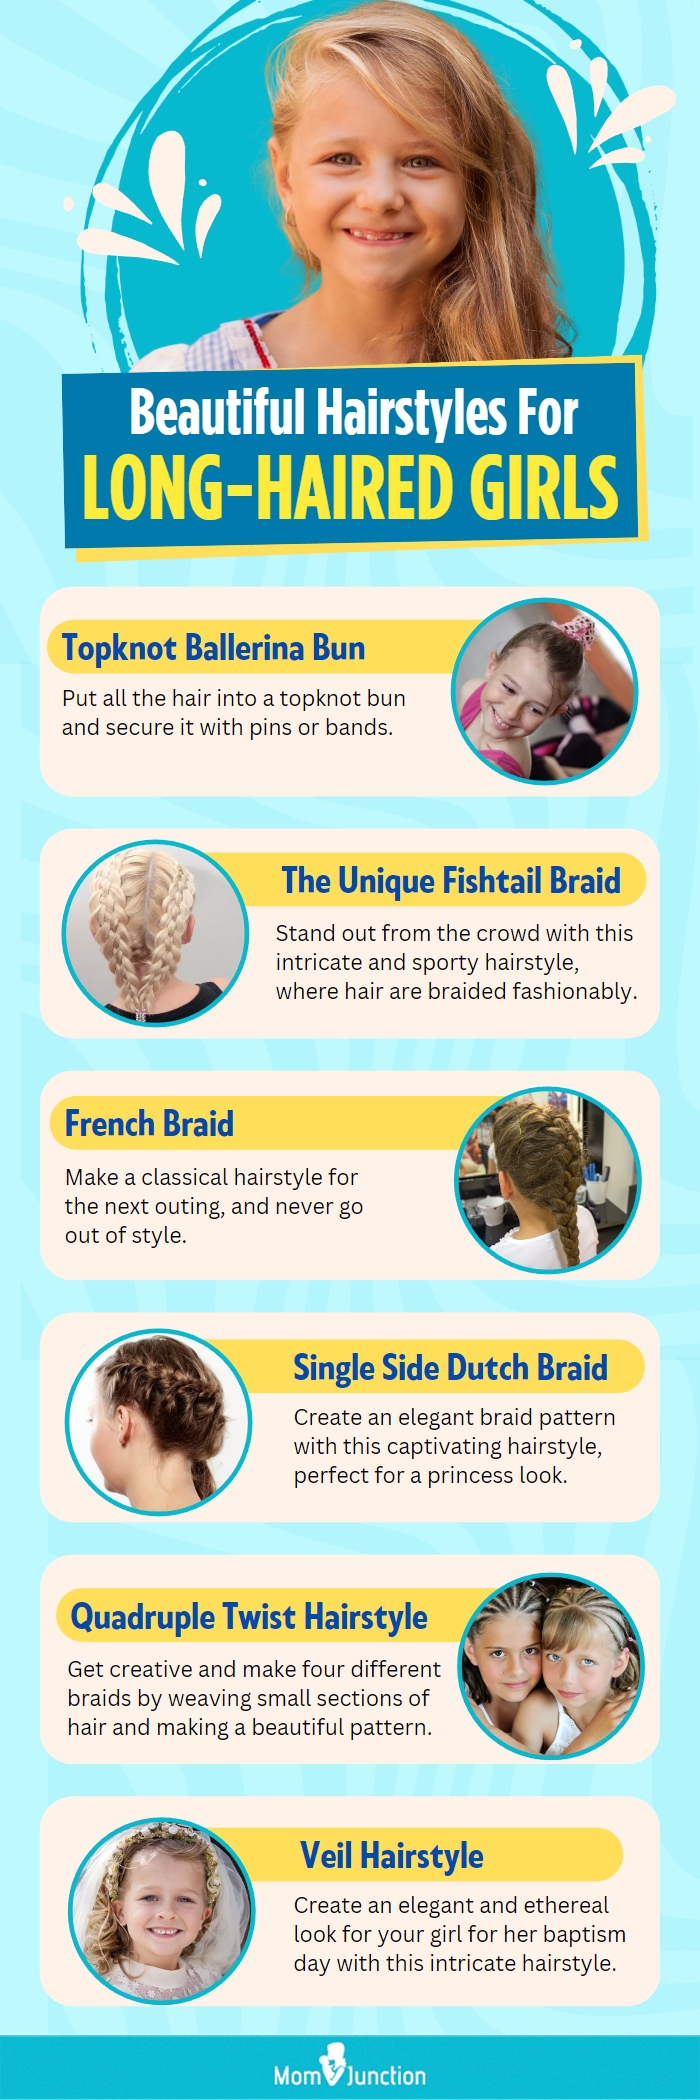 beautiful hairstyles for long haired girls (infographic)